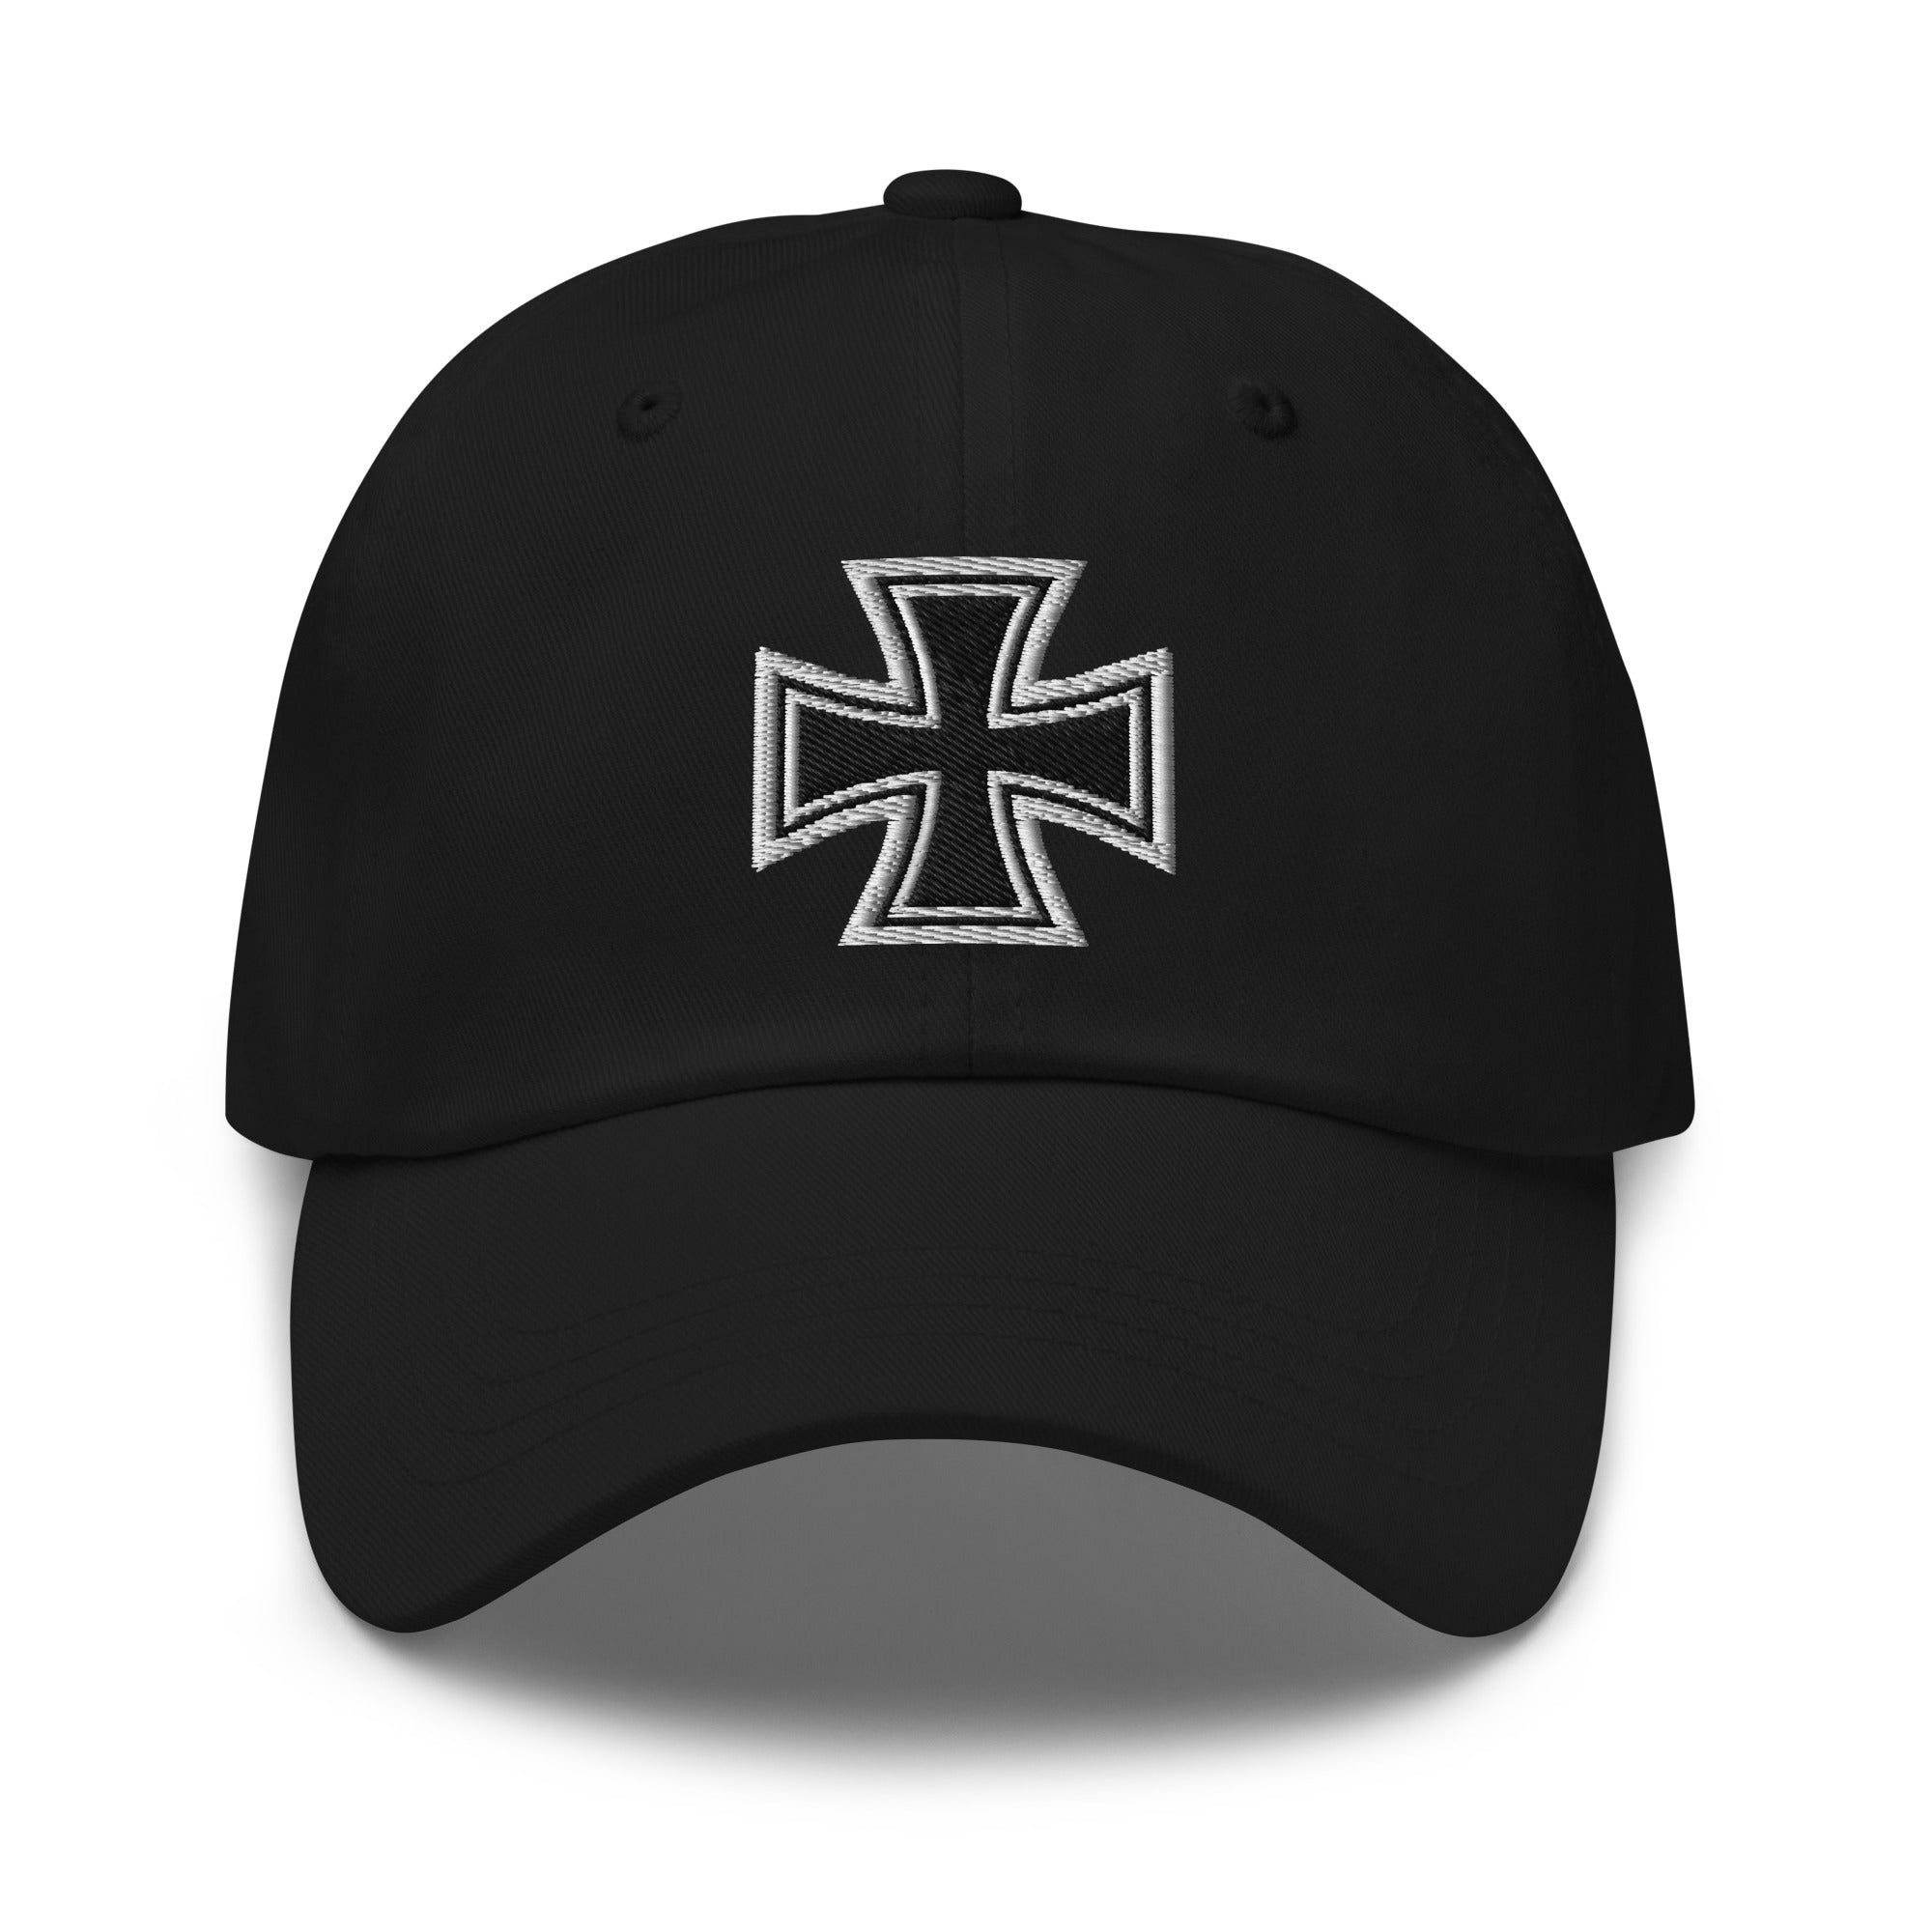 Iron Cross Occult Symbol World War II Style Embroidered Baseball Cap Dad hat - Edge of Life Designs